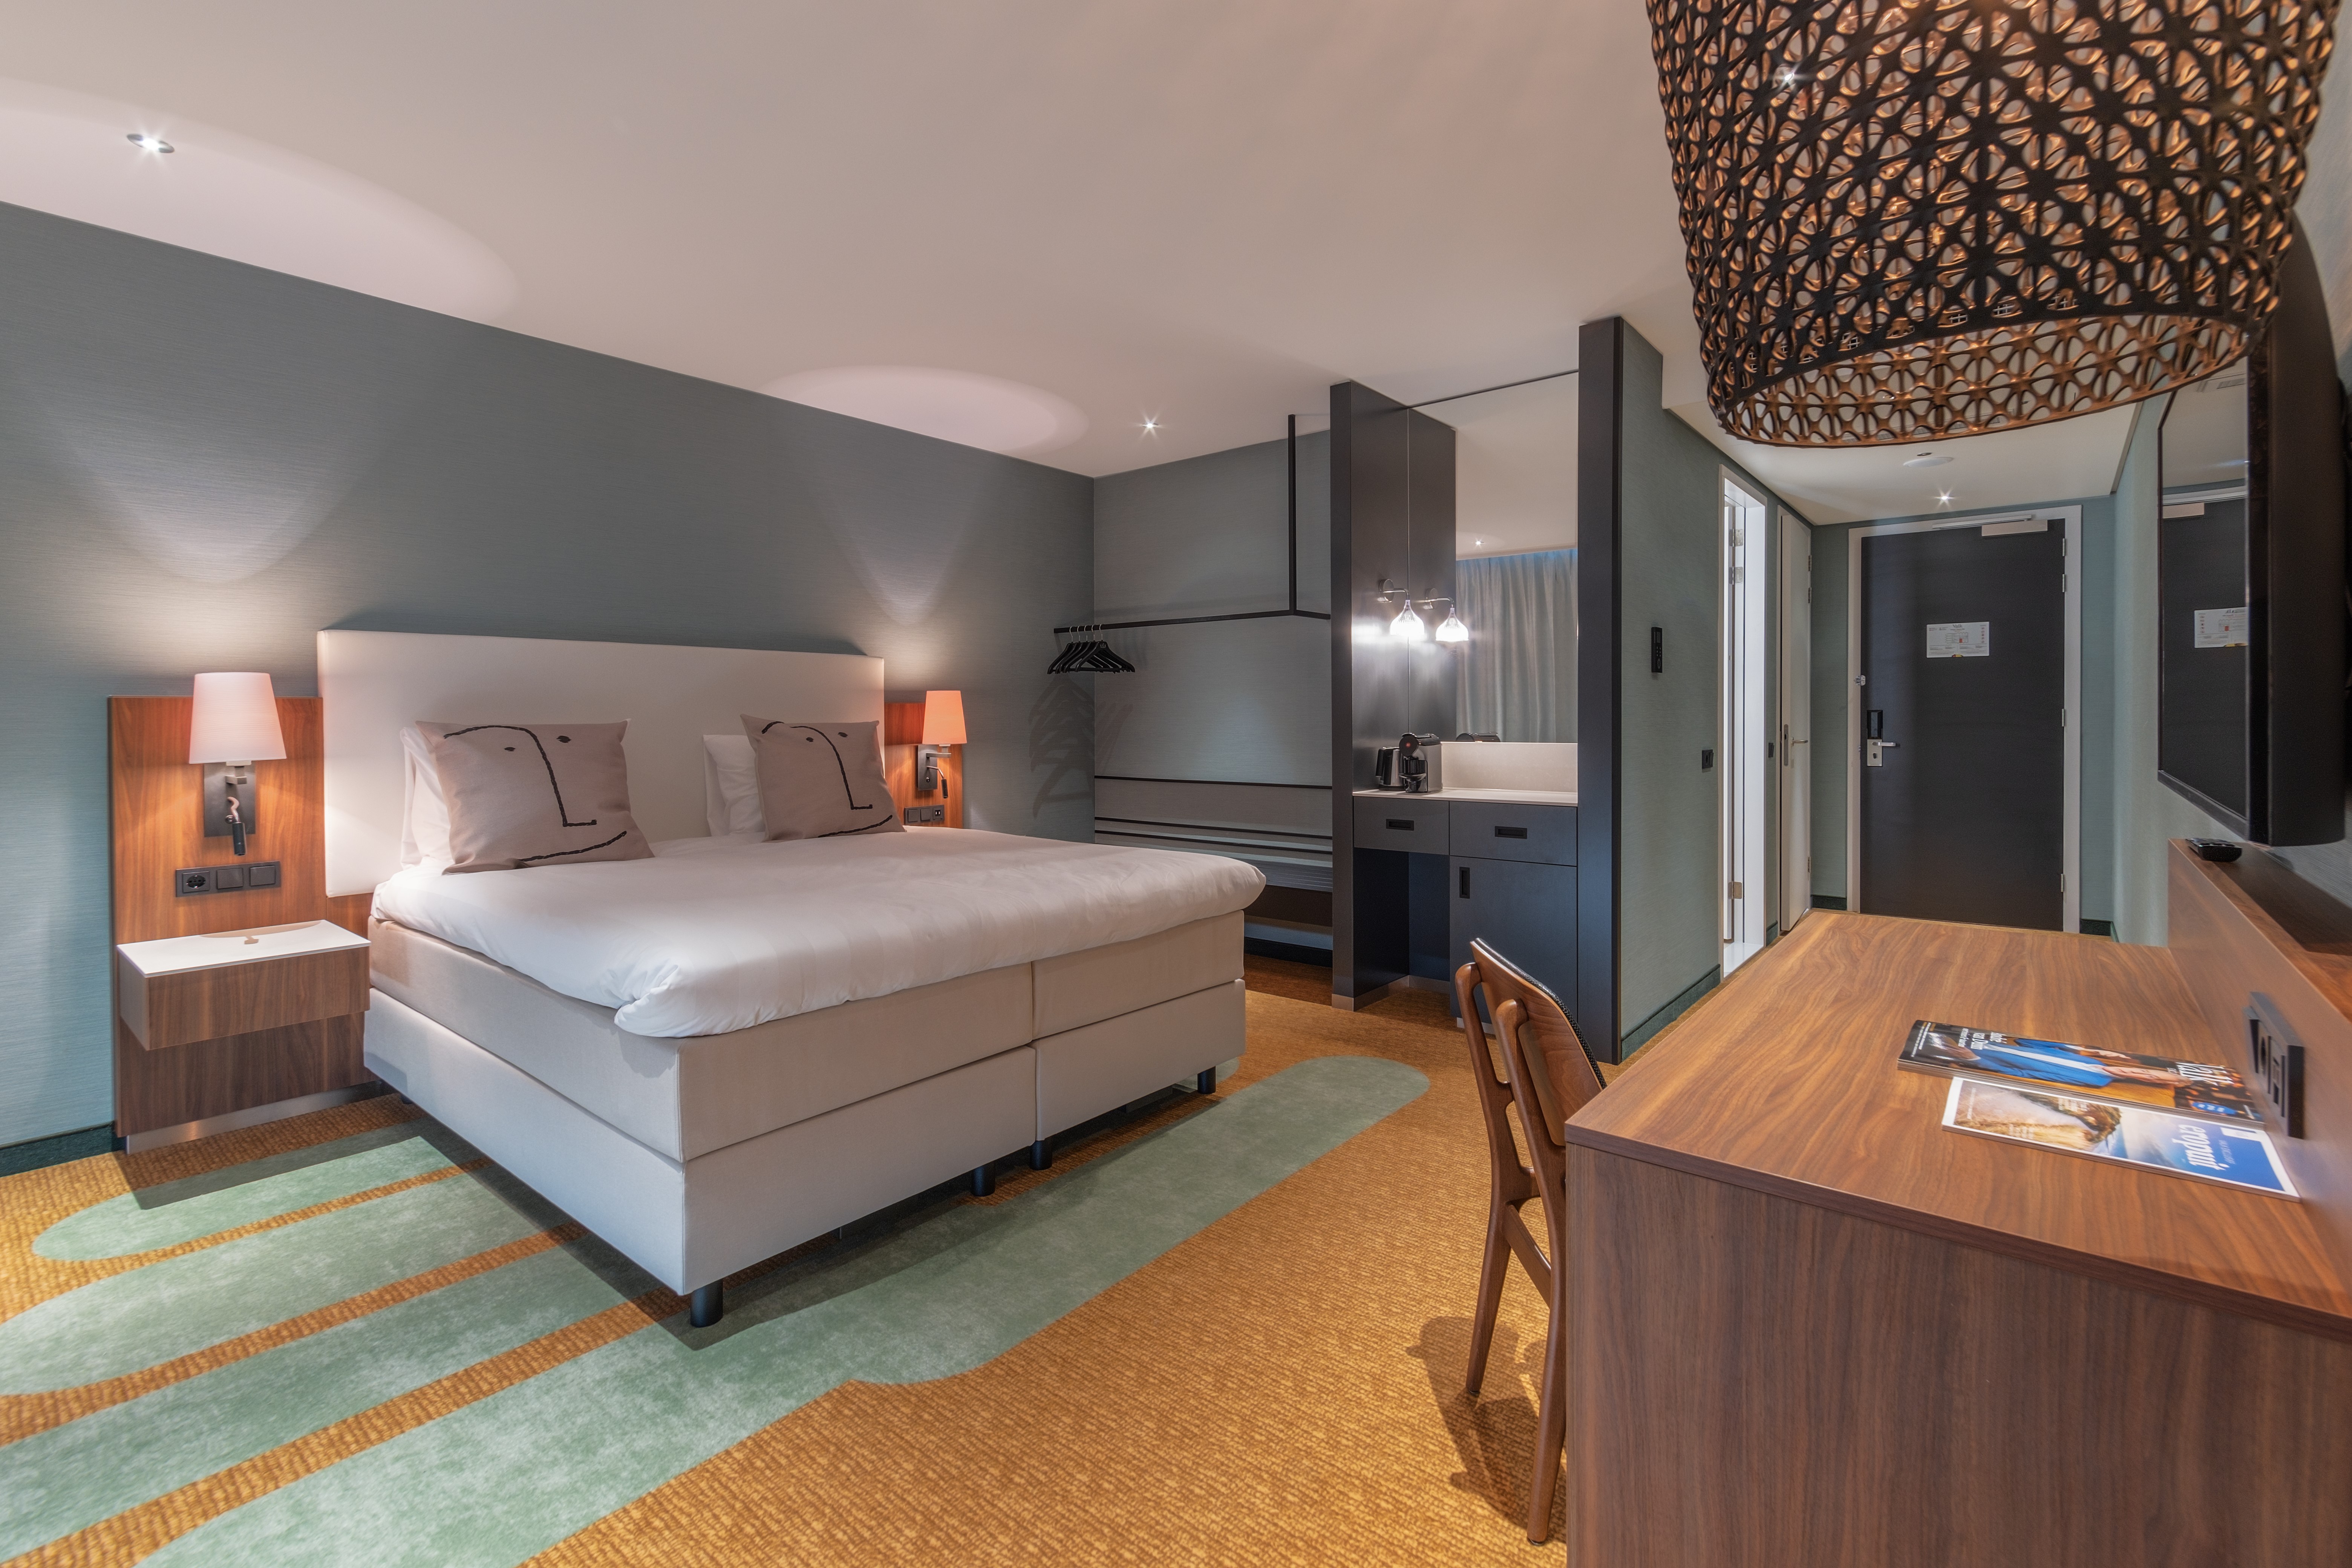 Spend the night in our new deluxe rooms